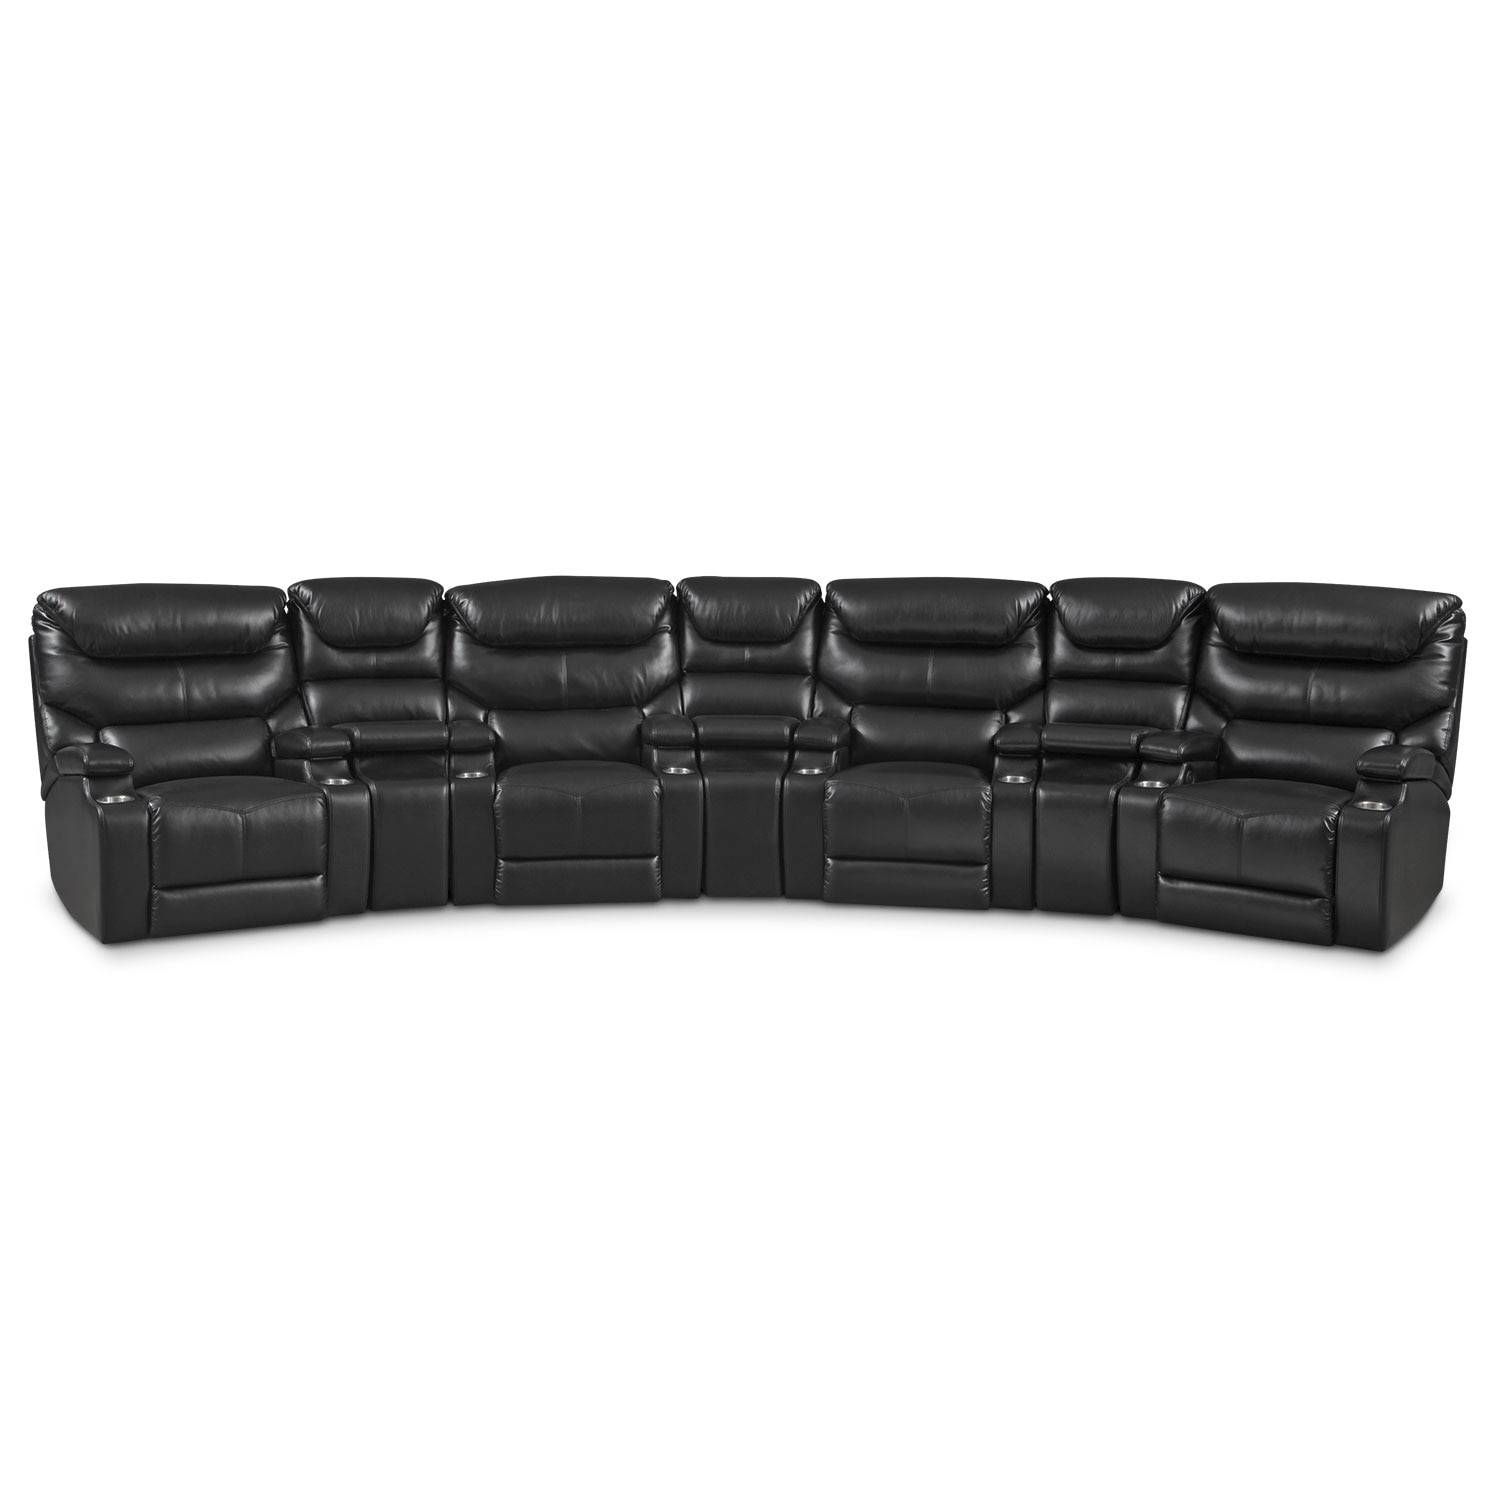 Sectional Sofas | Value City Furniture | Value City Furniture With Sofas And Sectionals (View 23 of 30)